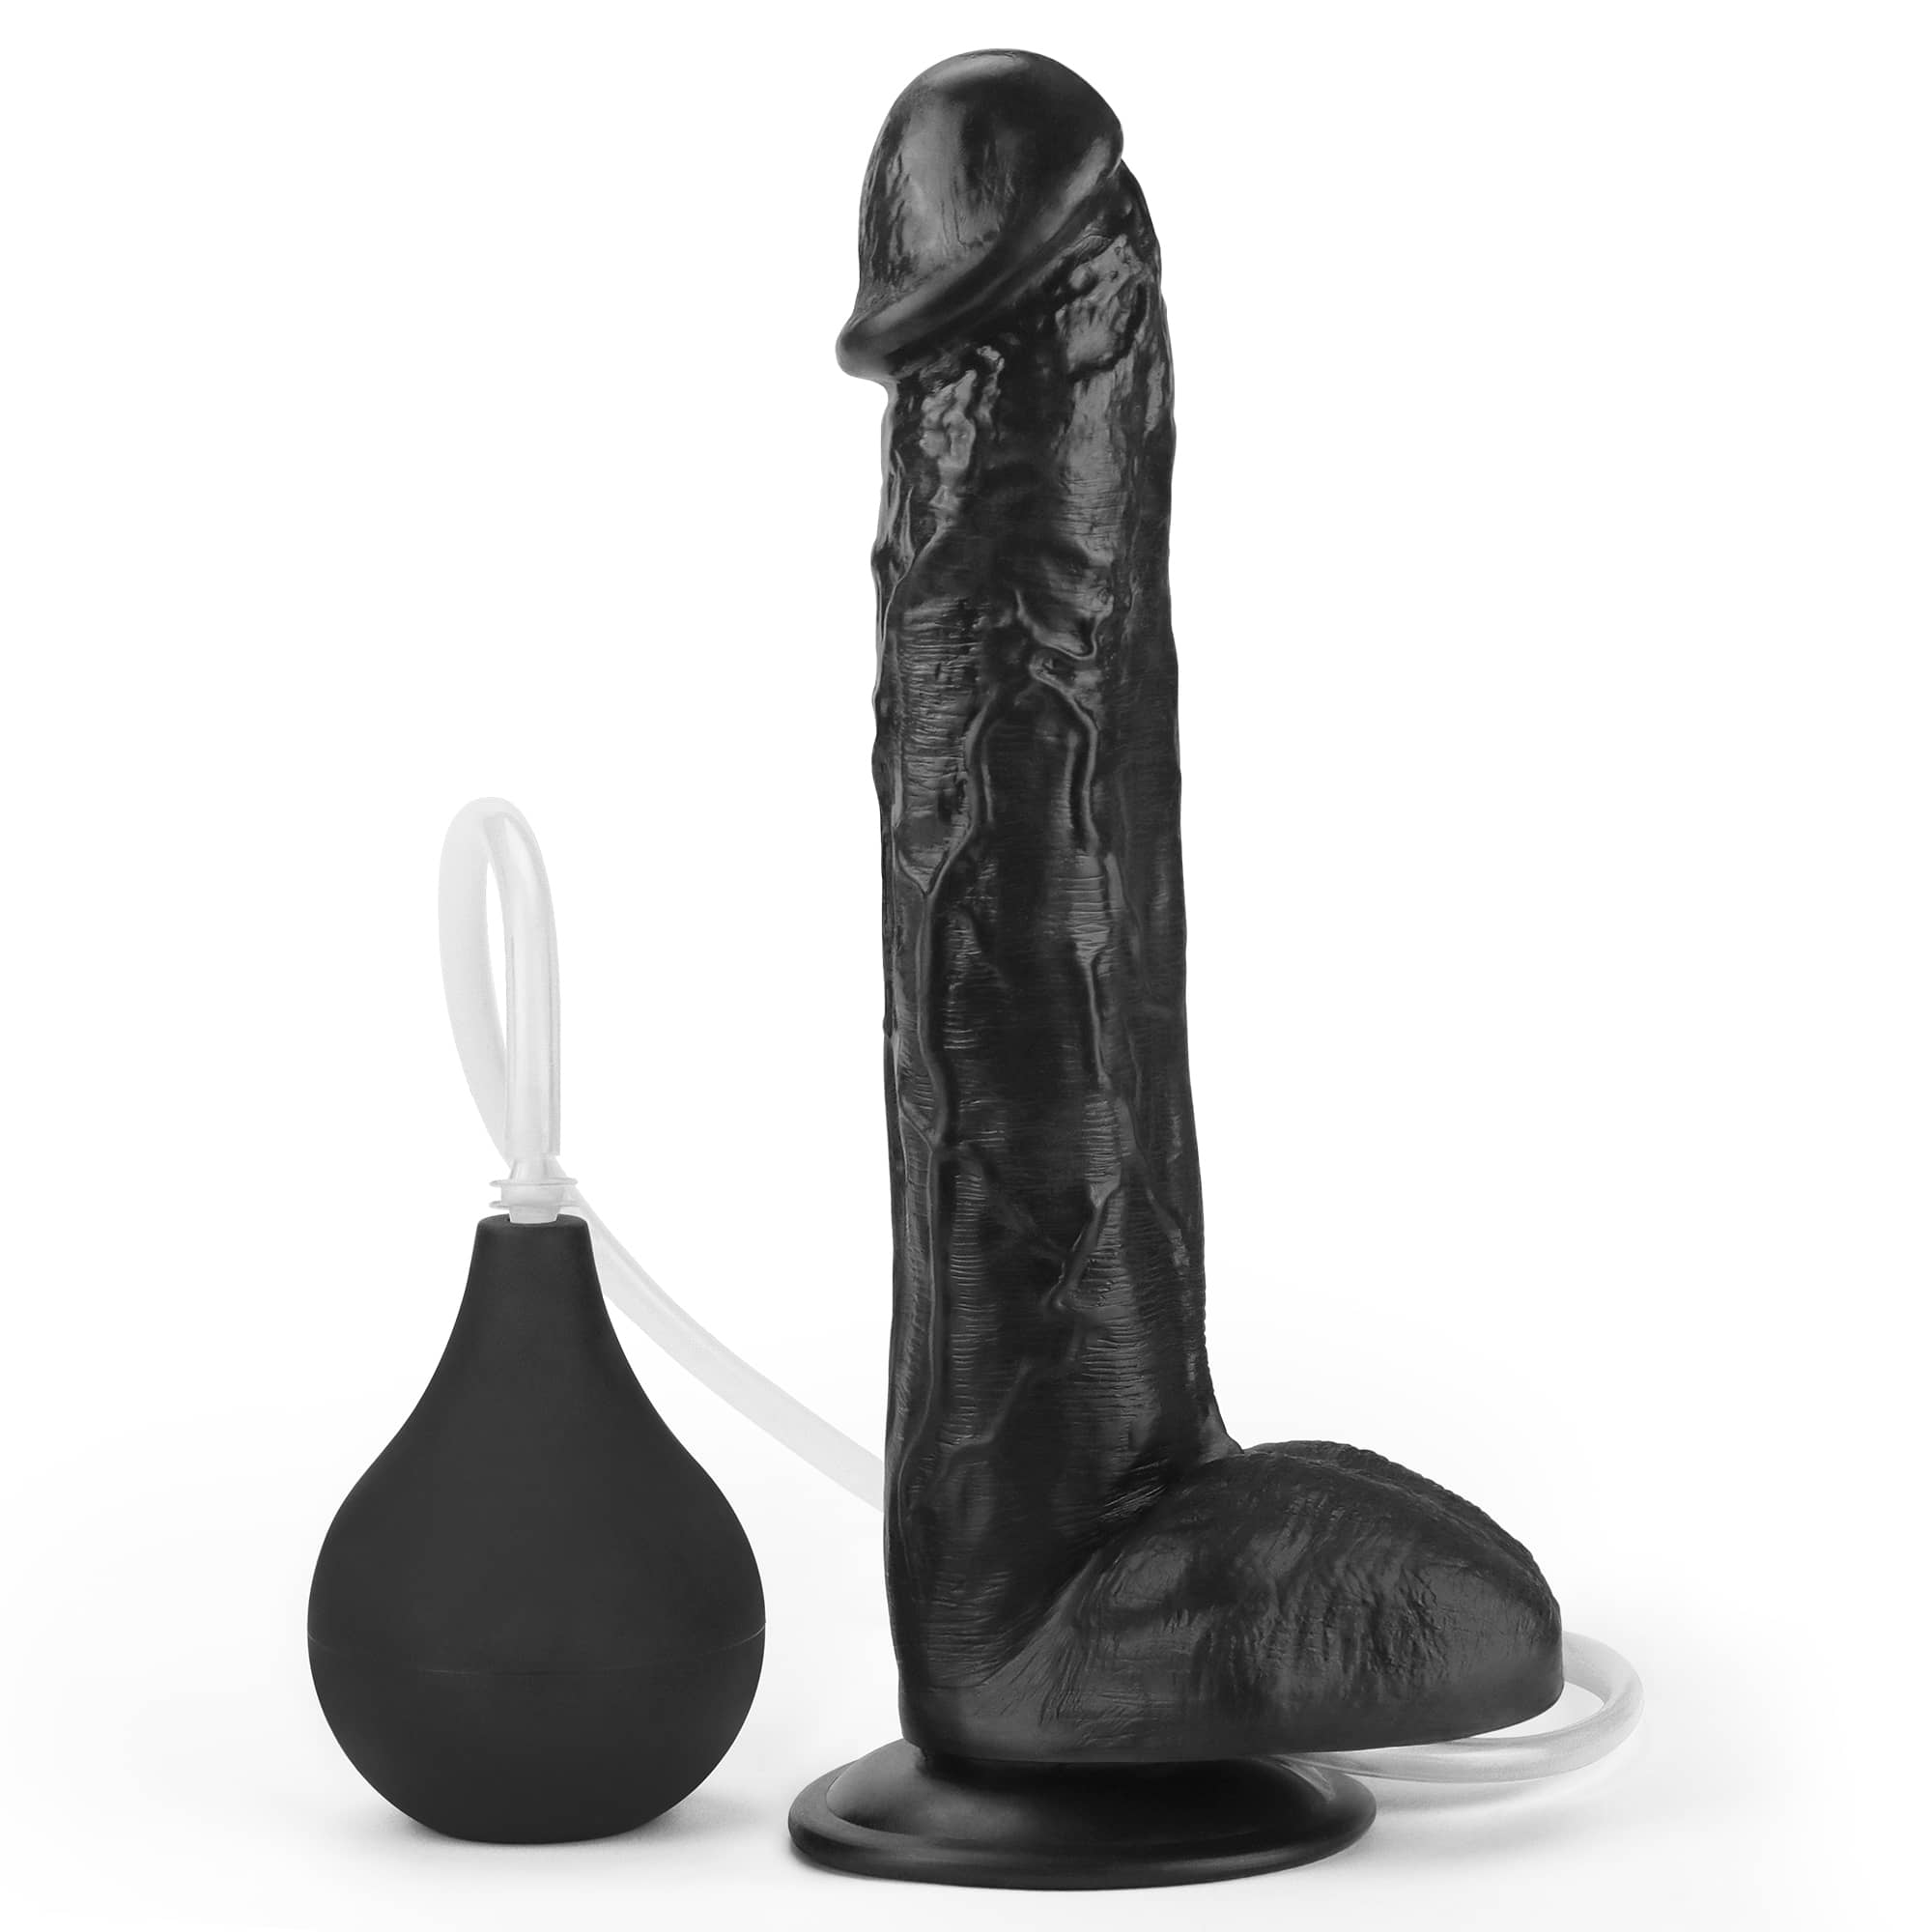 The 11 inches black realistic ejaculating dildo is upright